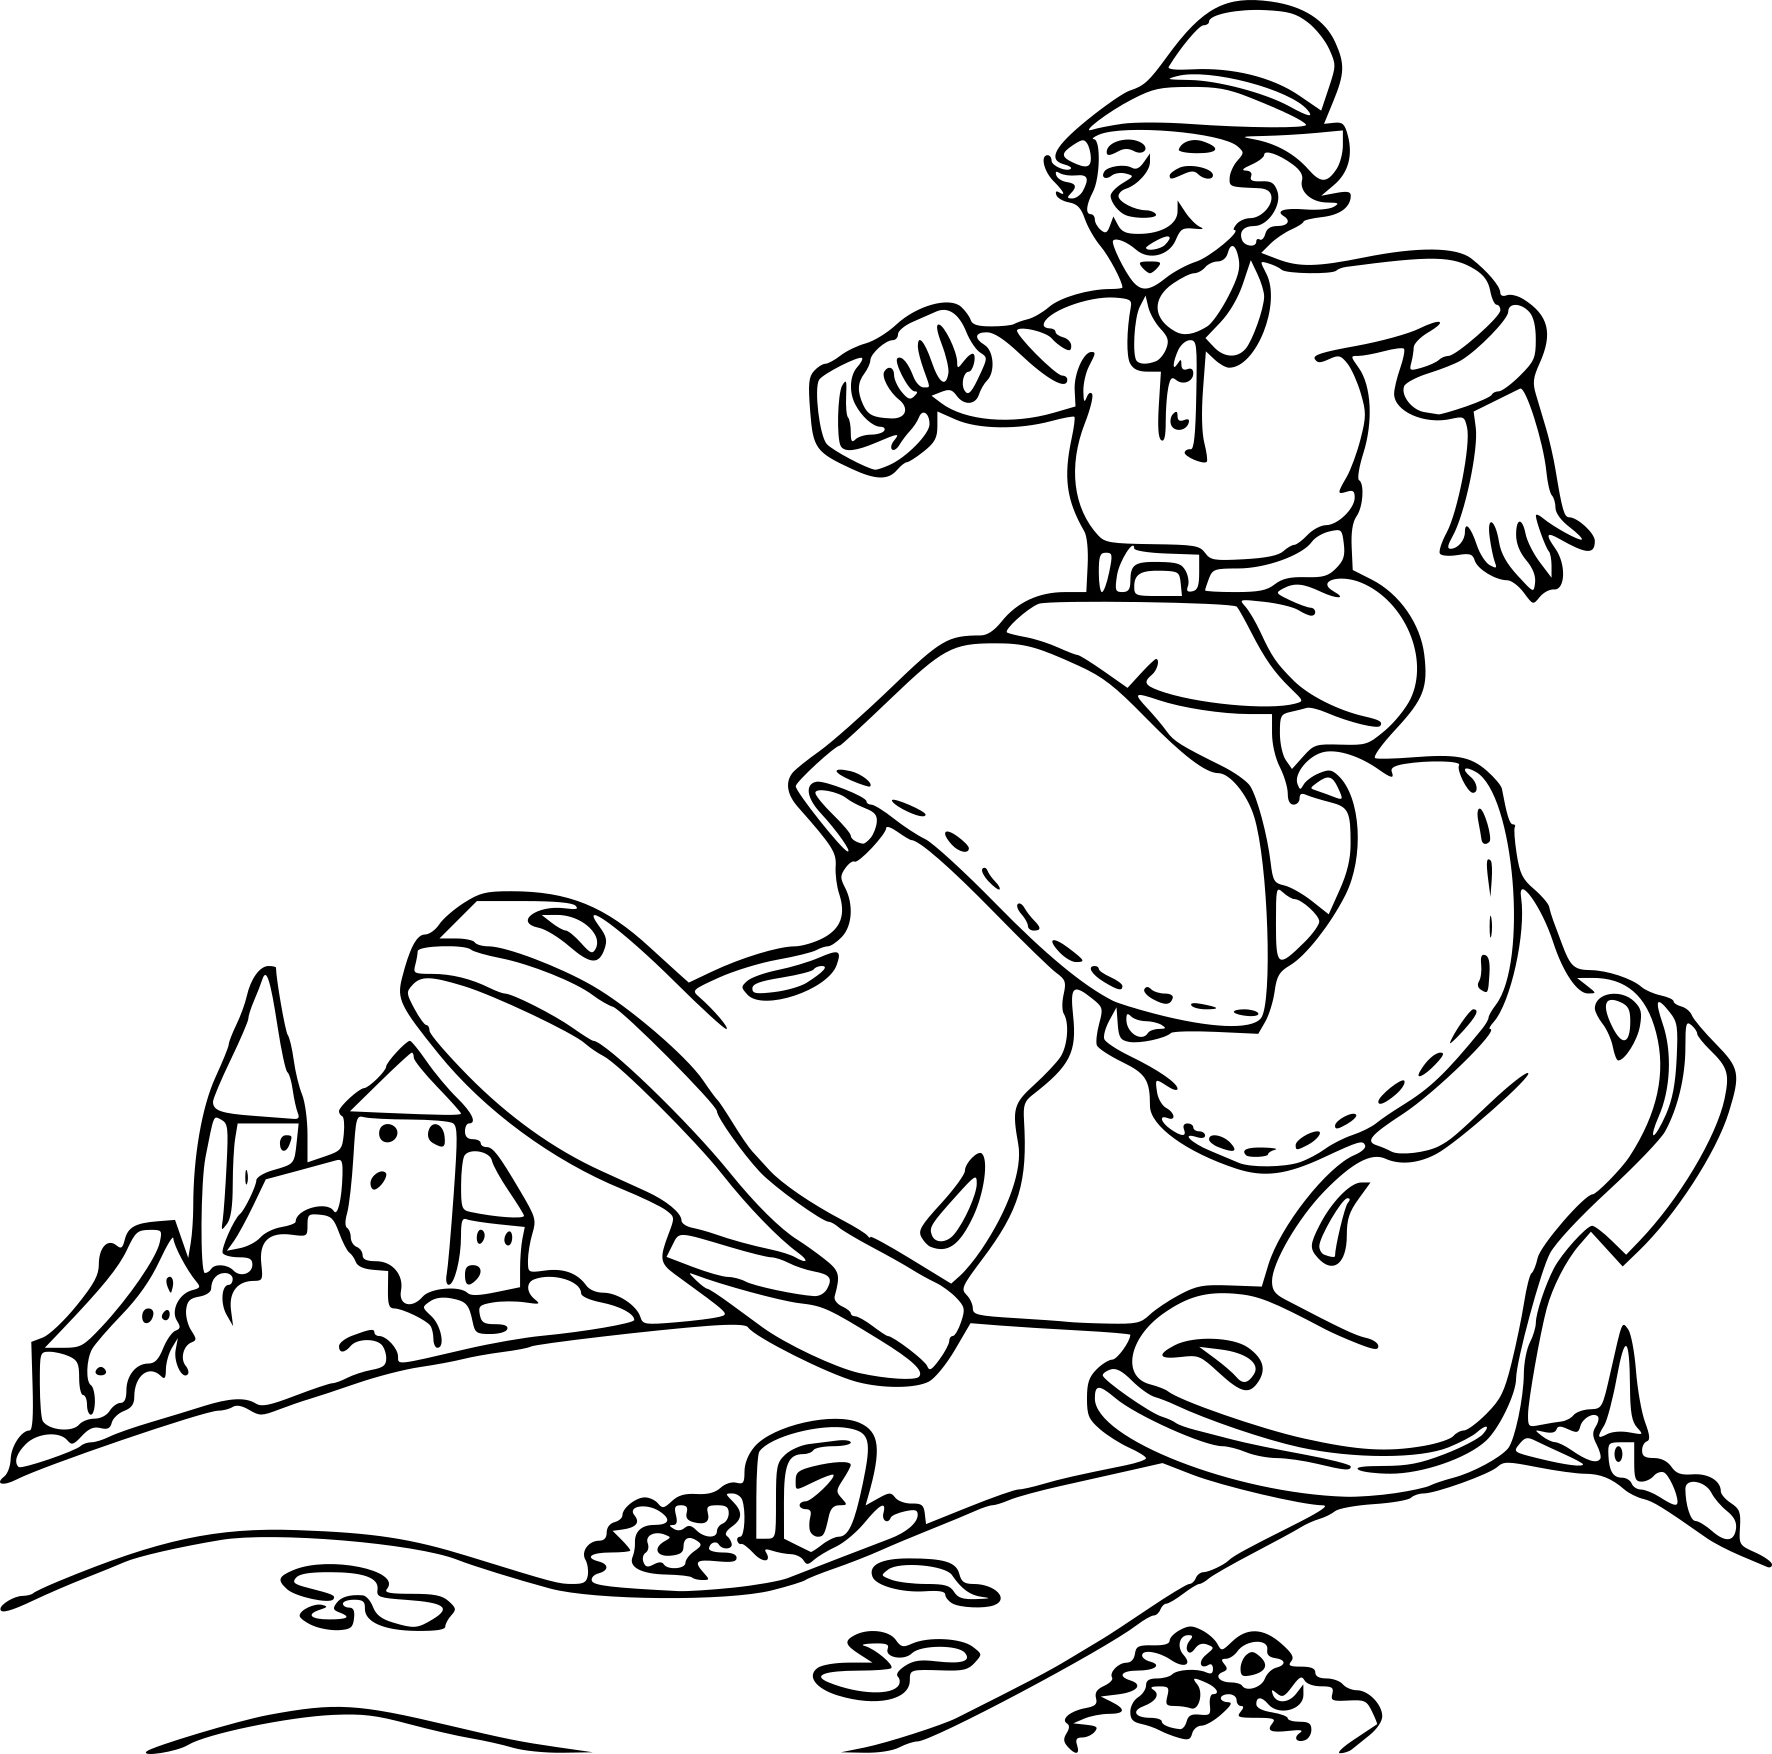 Little Thumb coloring page